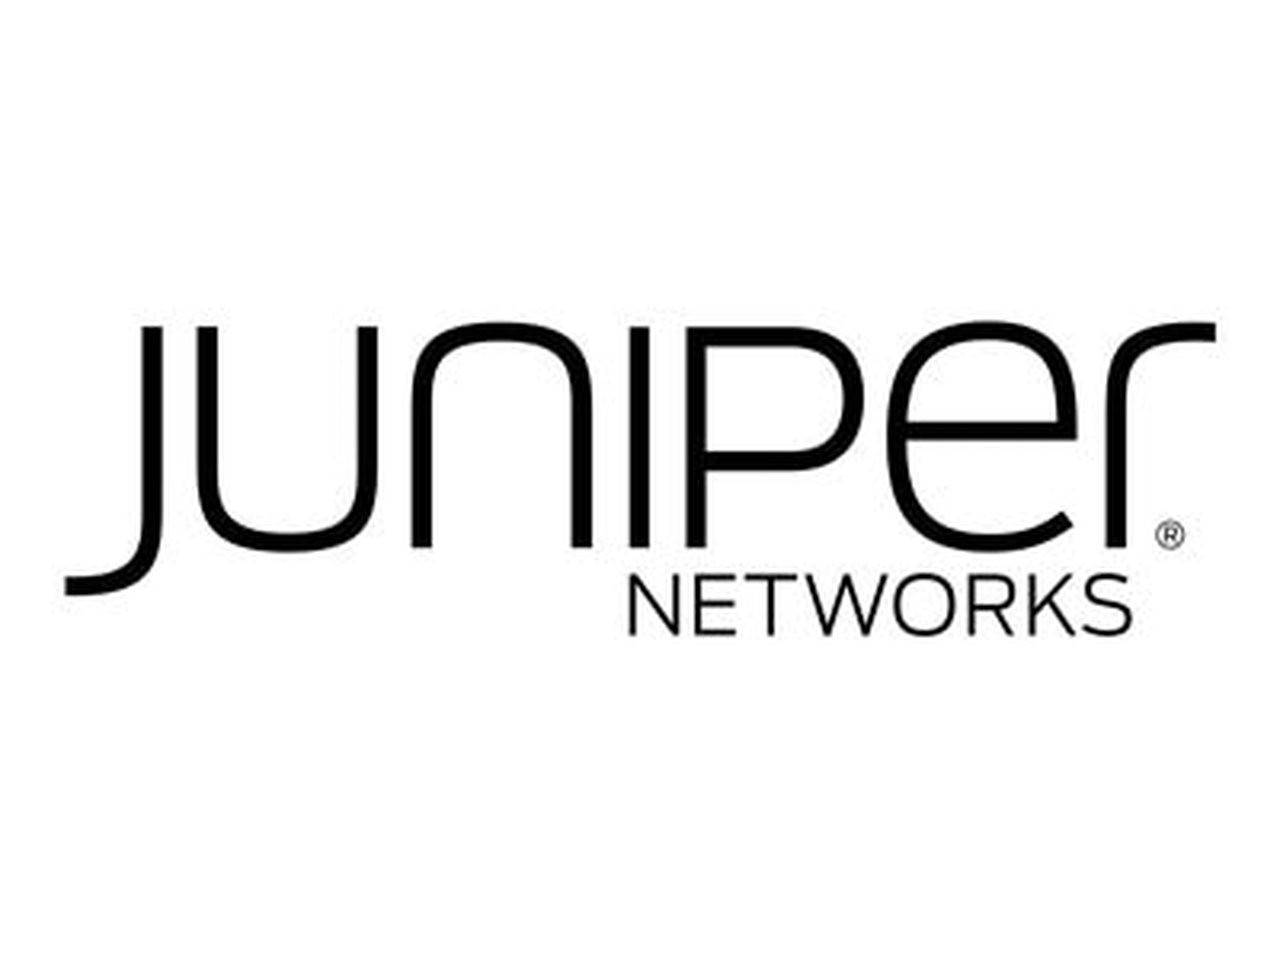 Juniper Bundle comprising of EX9204-BASE3B-AC and line card EX9200-32XS shipped separtely as two items